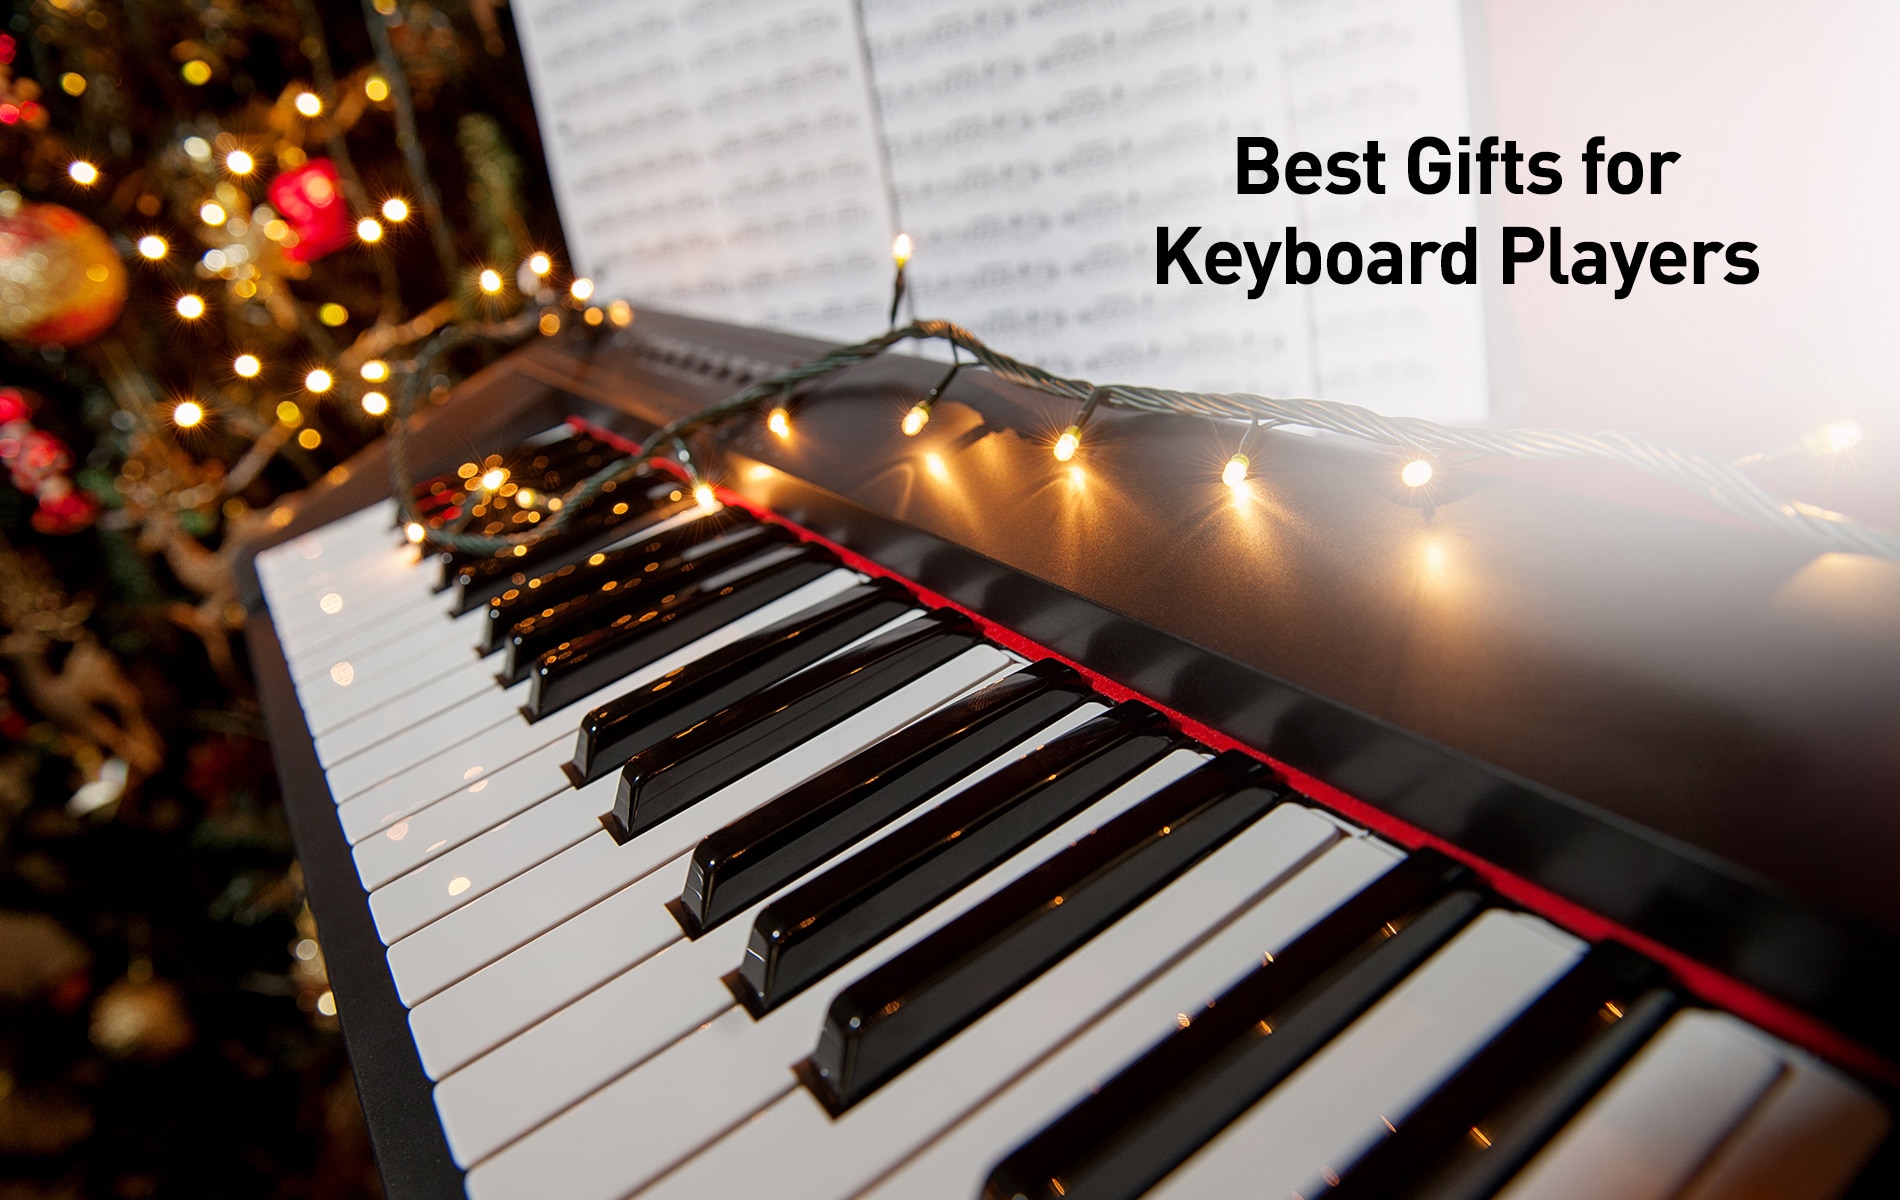 The Best Gifts for Keyboard Players